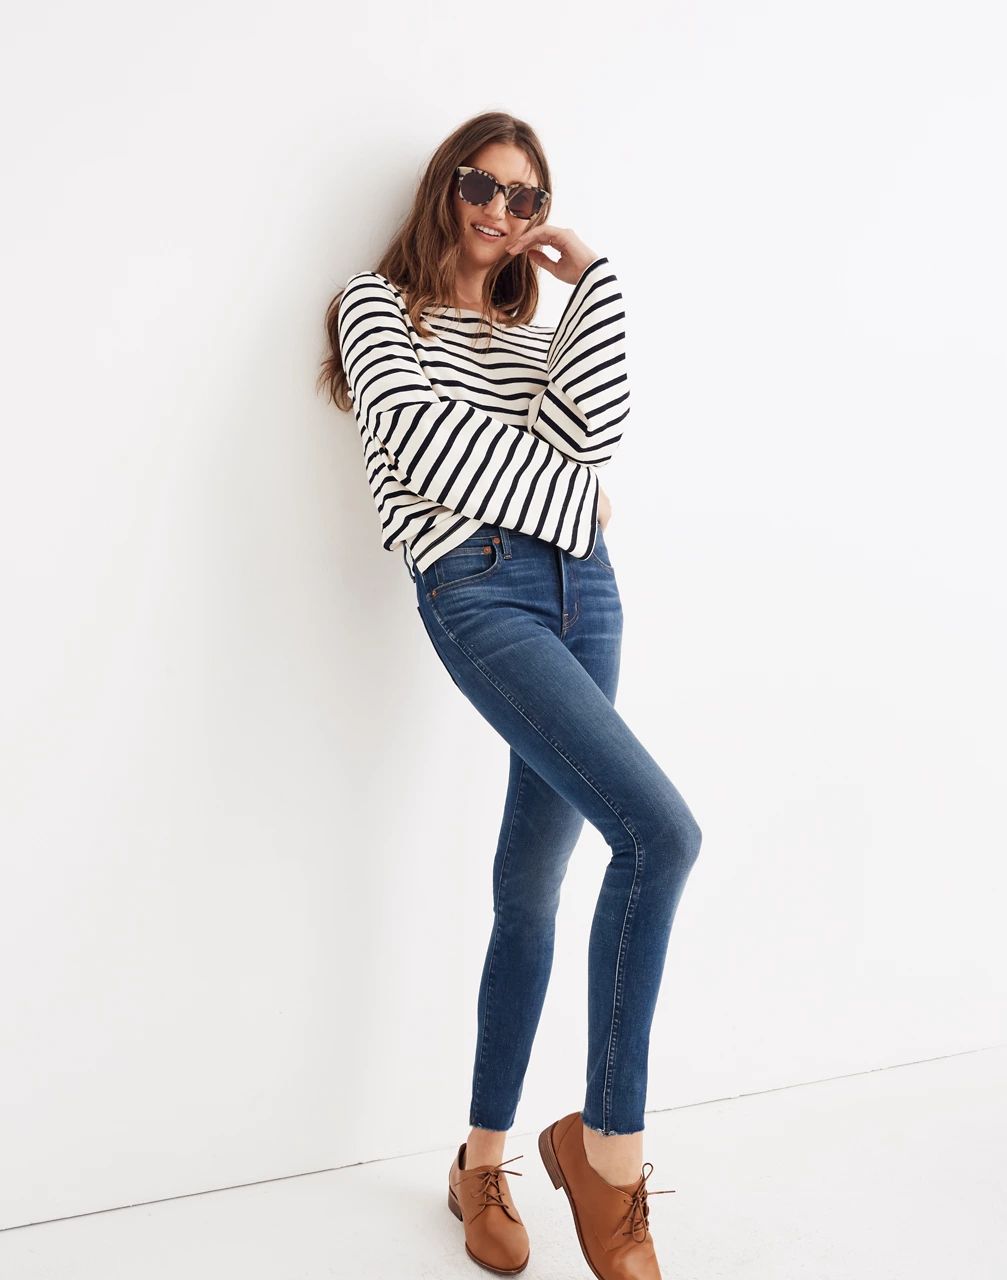 9" High-Rise Skinny Jeans in Paloma Wash: Raw-Hem Edition | Madewell